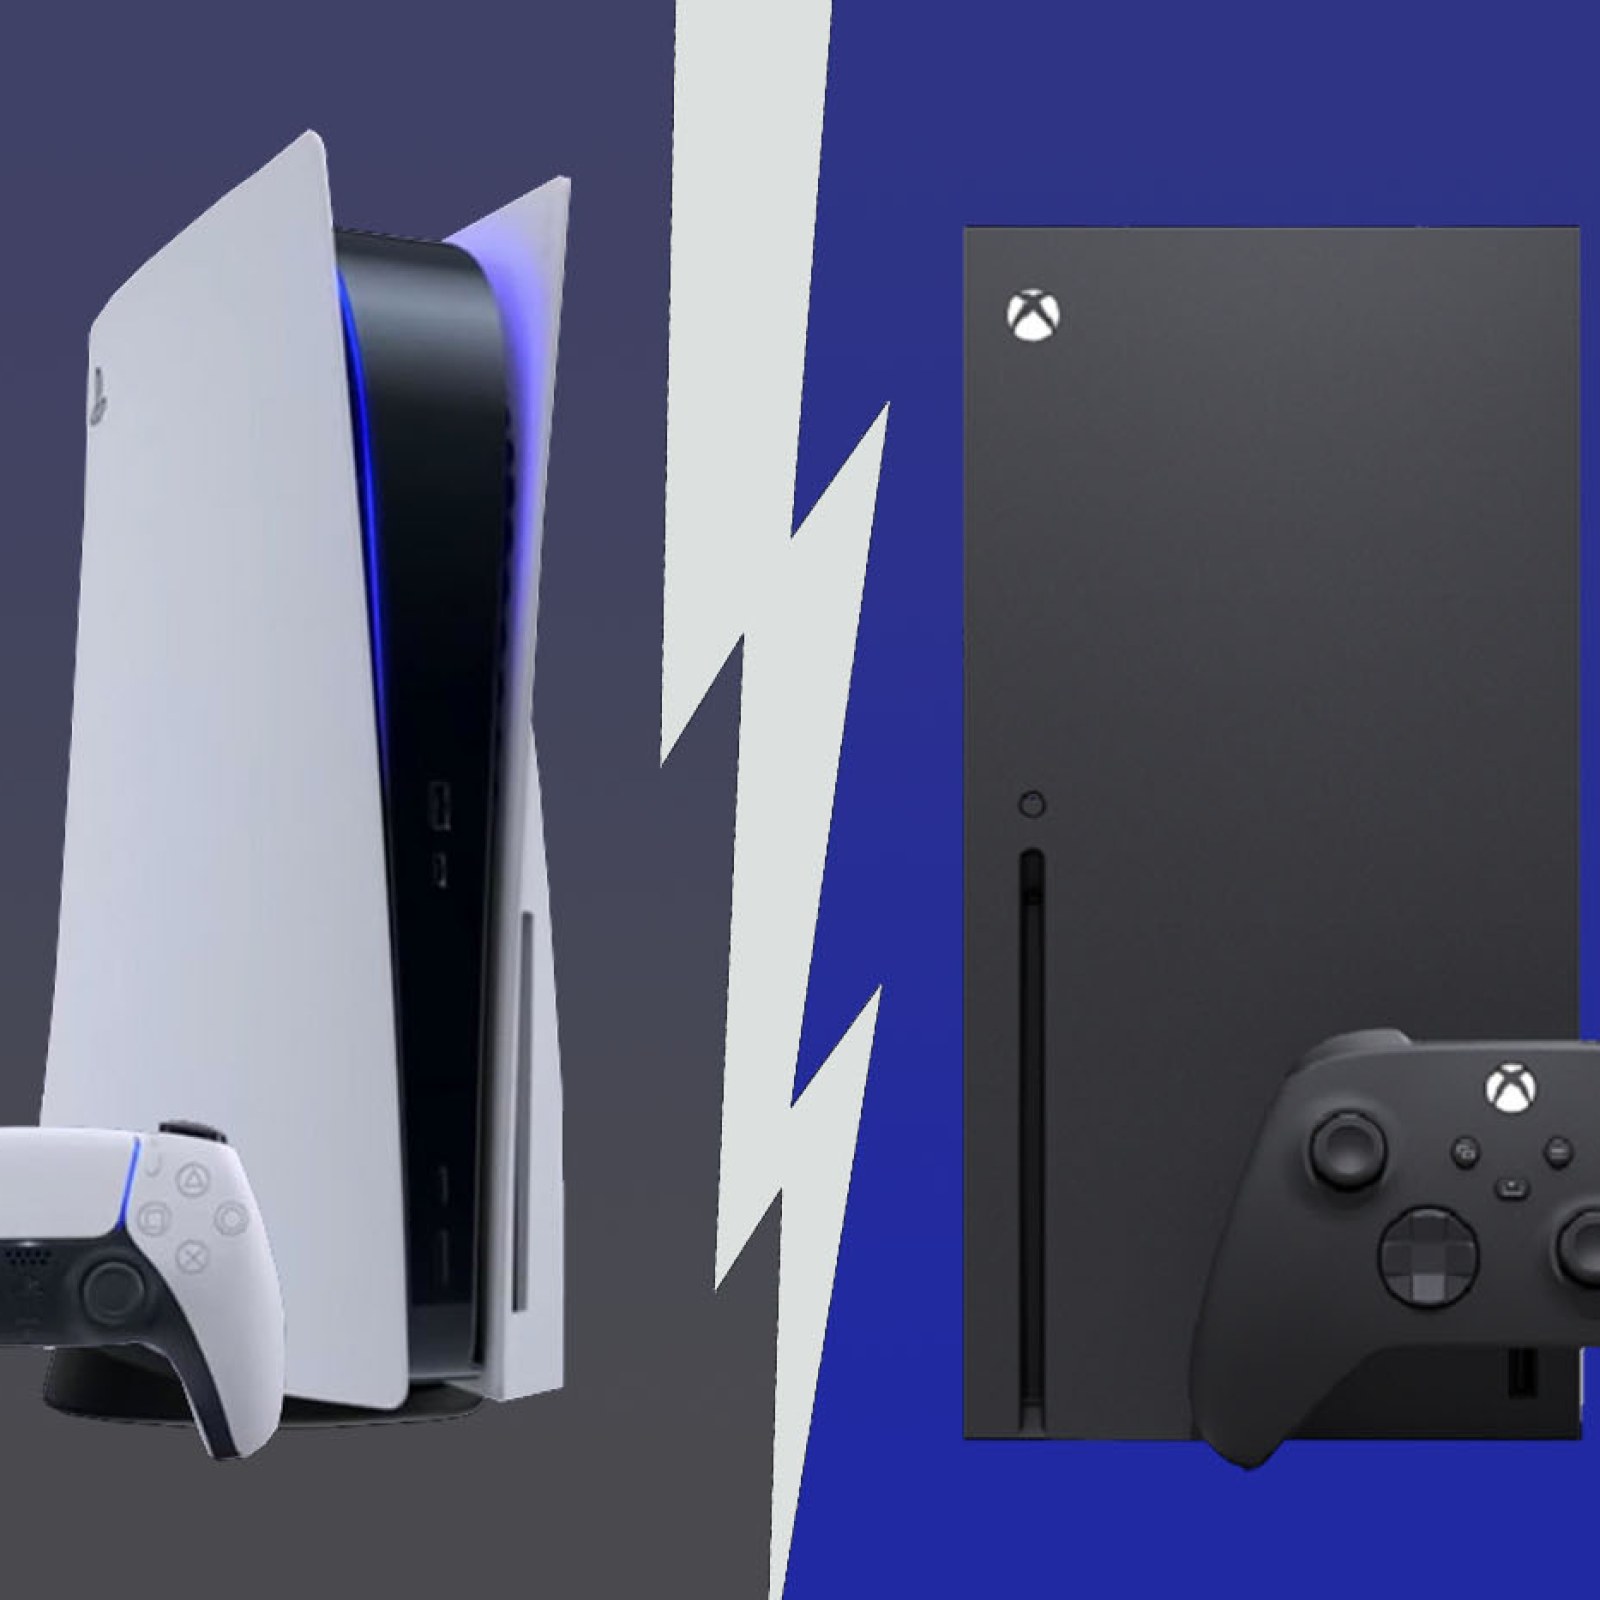 PS5 vs. Xbox: Grading the First 2 Years - Next-Gen Console Watch - IGN